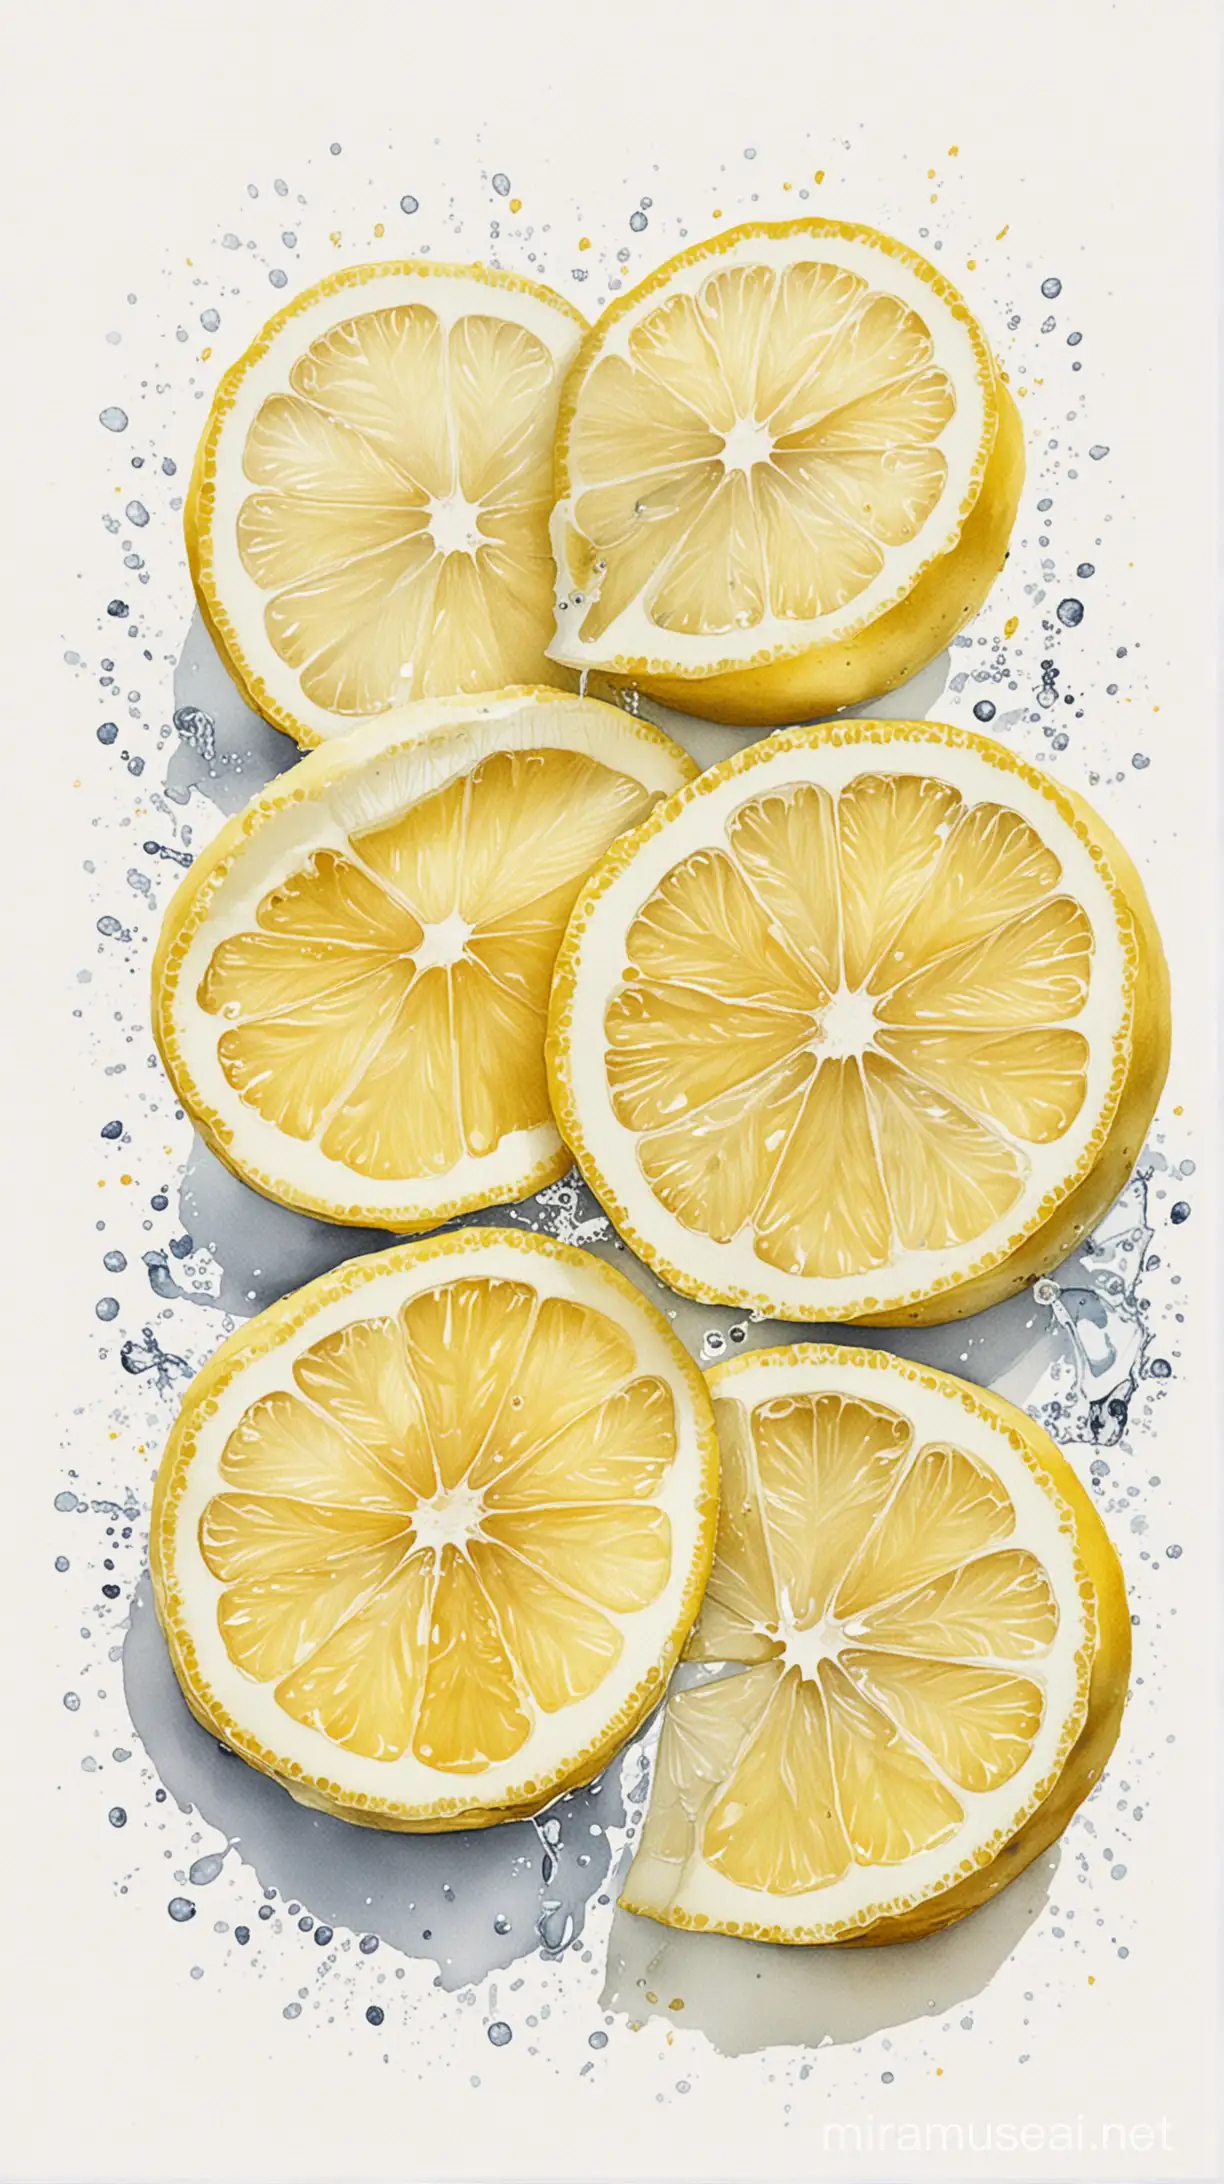 Refreshing Lemon Slices on Clean White Background Watercolor Painting